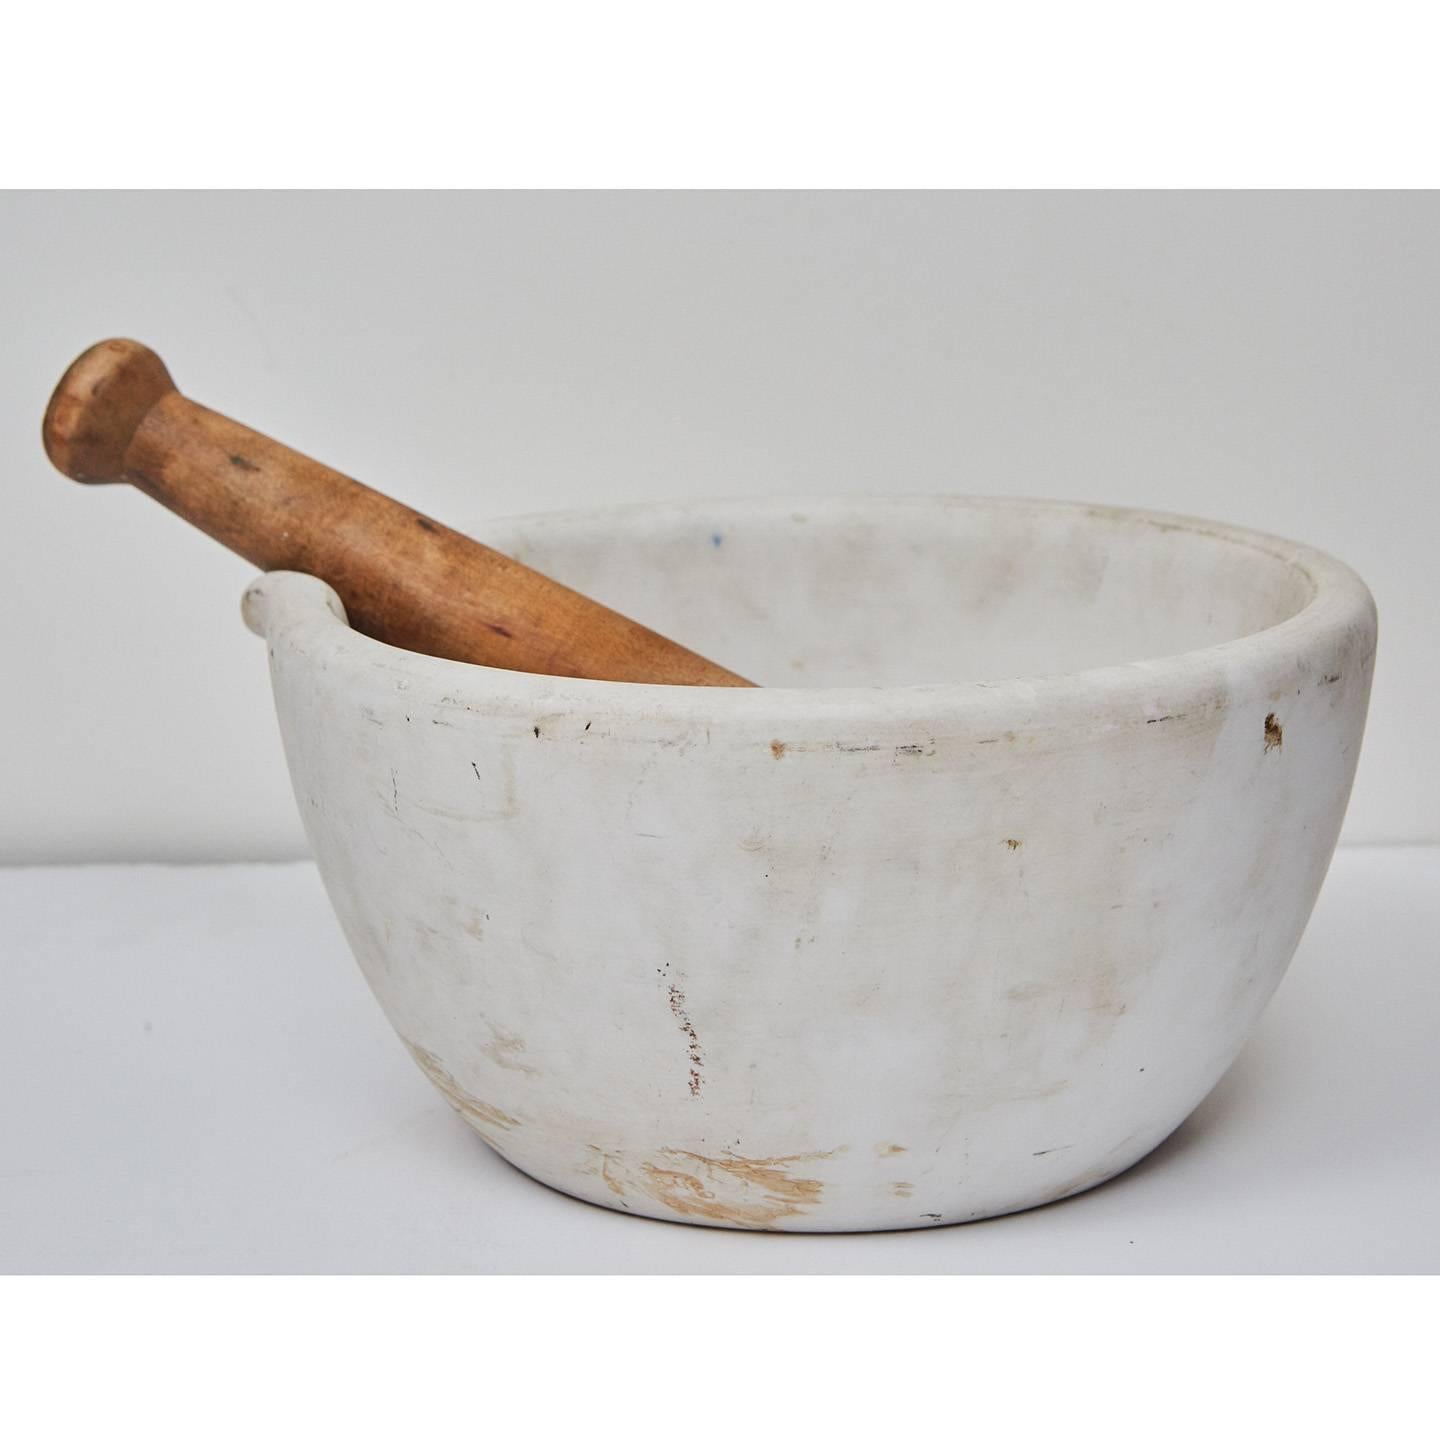 This large mortar and pestle is made from white stone with a nice lip on the mortar and shaped wooden handle on the pestle. We believe this piece was used in an early 20th century pharmacy as it shows nice signs of age and wear.
 